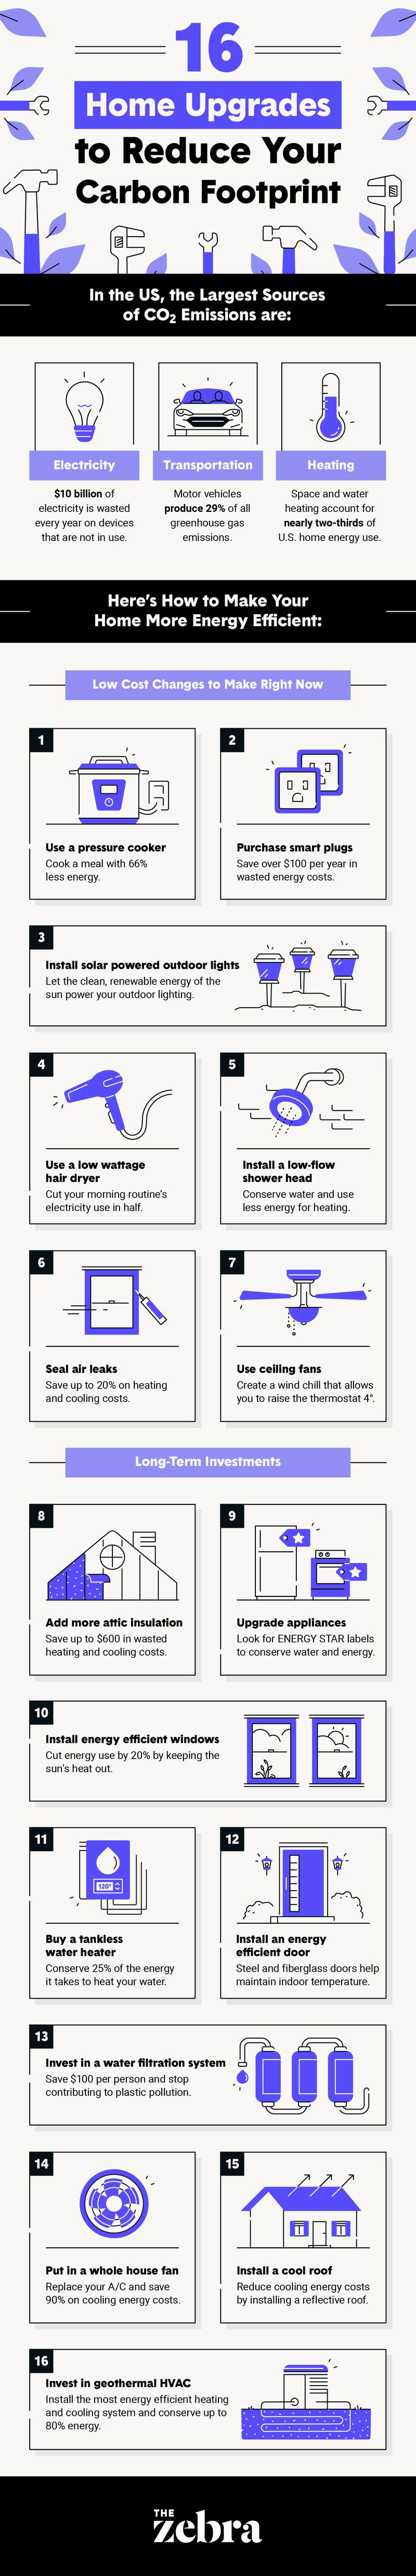 green home upgrades infographic